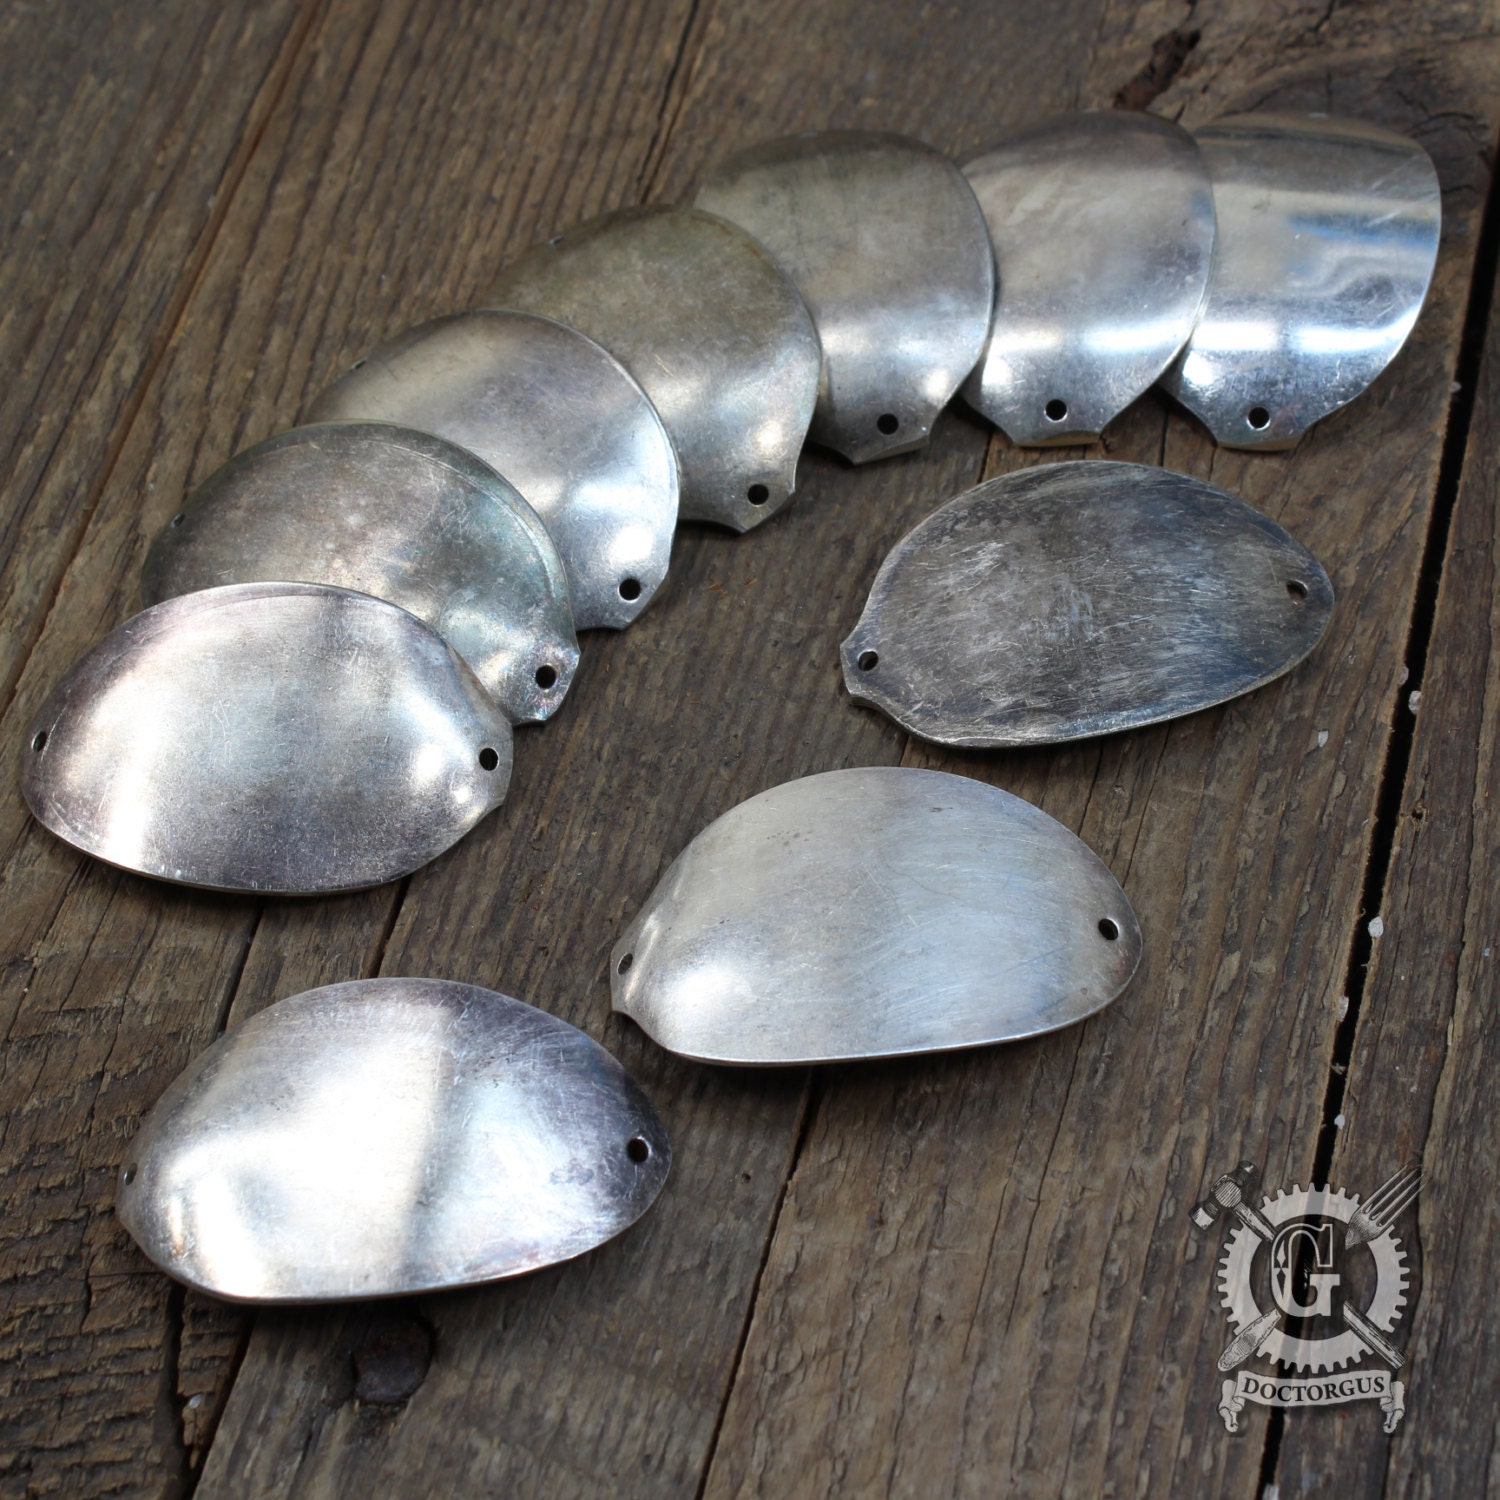 Curved Spoon Bracelet Parts - 10 Piece Assortment - Antique Sterling Silver Plated Silverware - Make Your Own Spoon Jewelry - Metal Stamping